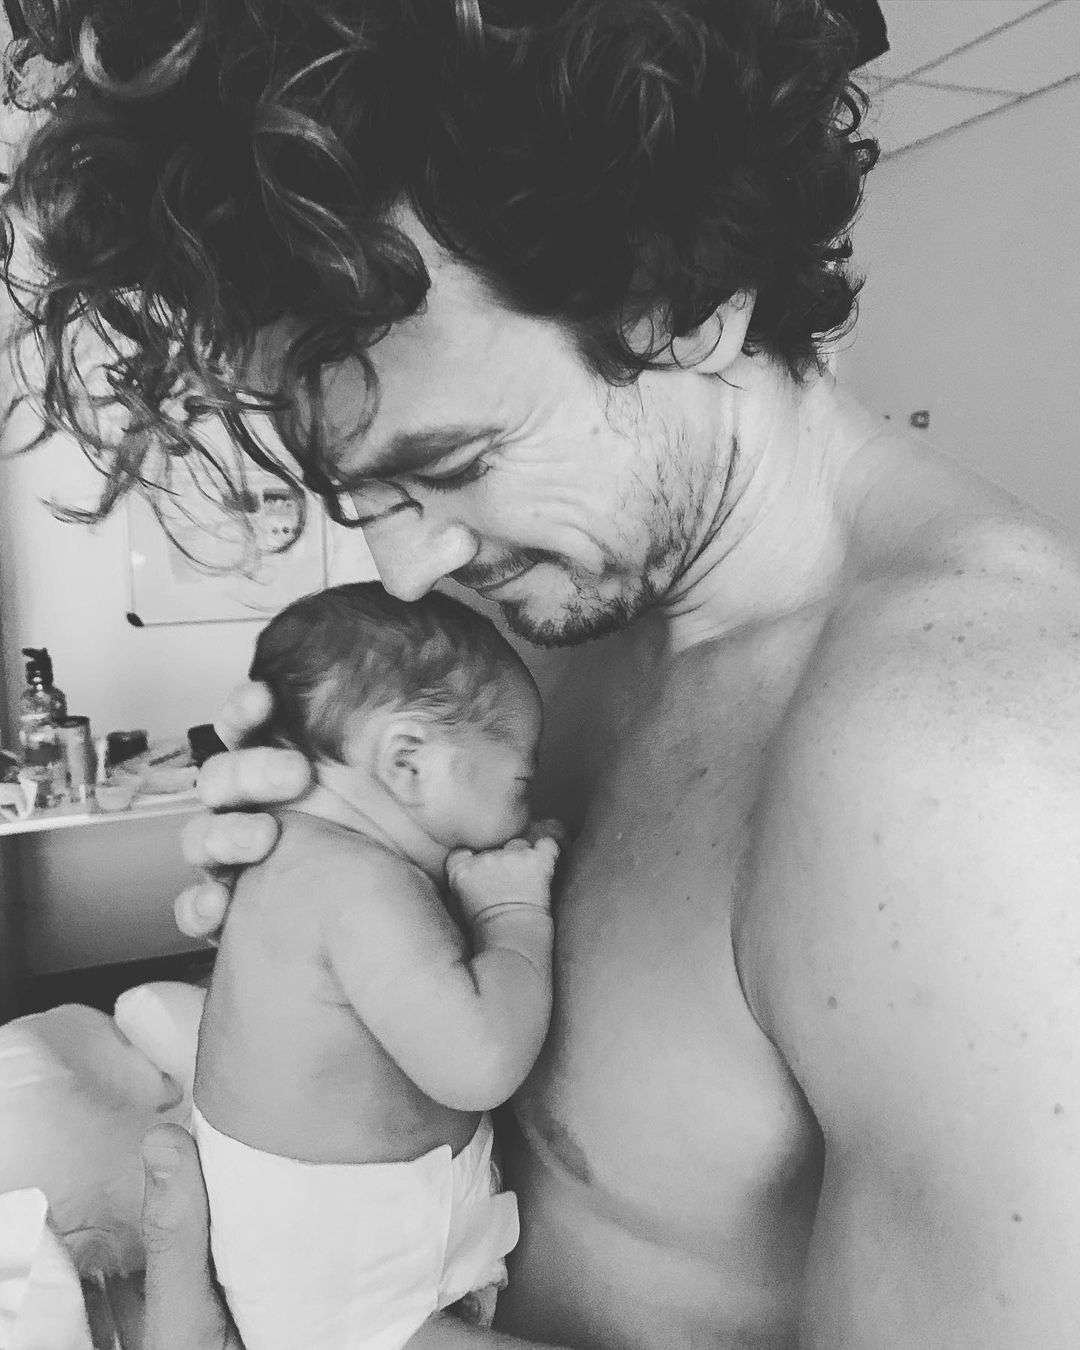 <p>Chilling Adventures of Sabrina actor Luke Cook welcomed his first child - a son named Chaplin Benjamin Cook - with his wife, stylist Kara Wilson, on Nov. 11, the couple announced on their respective Instagram accounts..</p>
                            <p>"Chaplin Benjamin Cook. Born 11/11/2020," he captioned a sweet black-and-white photo of himself cradling the newborn. "Kara was brave. We all cried. He's a joy."</p>
                            <p>The new mom wrote in her own Instagram caption, "Chaplin Benjamin Cook 💕 I've dreamt about what this moment would feel like for what seems like an eternity. To finally hold you in my arms for the first time. To stare at you. To take you in. To breathe you in. That smell...It's what only my dreams have been made of. And now here you are."</p>
                            